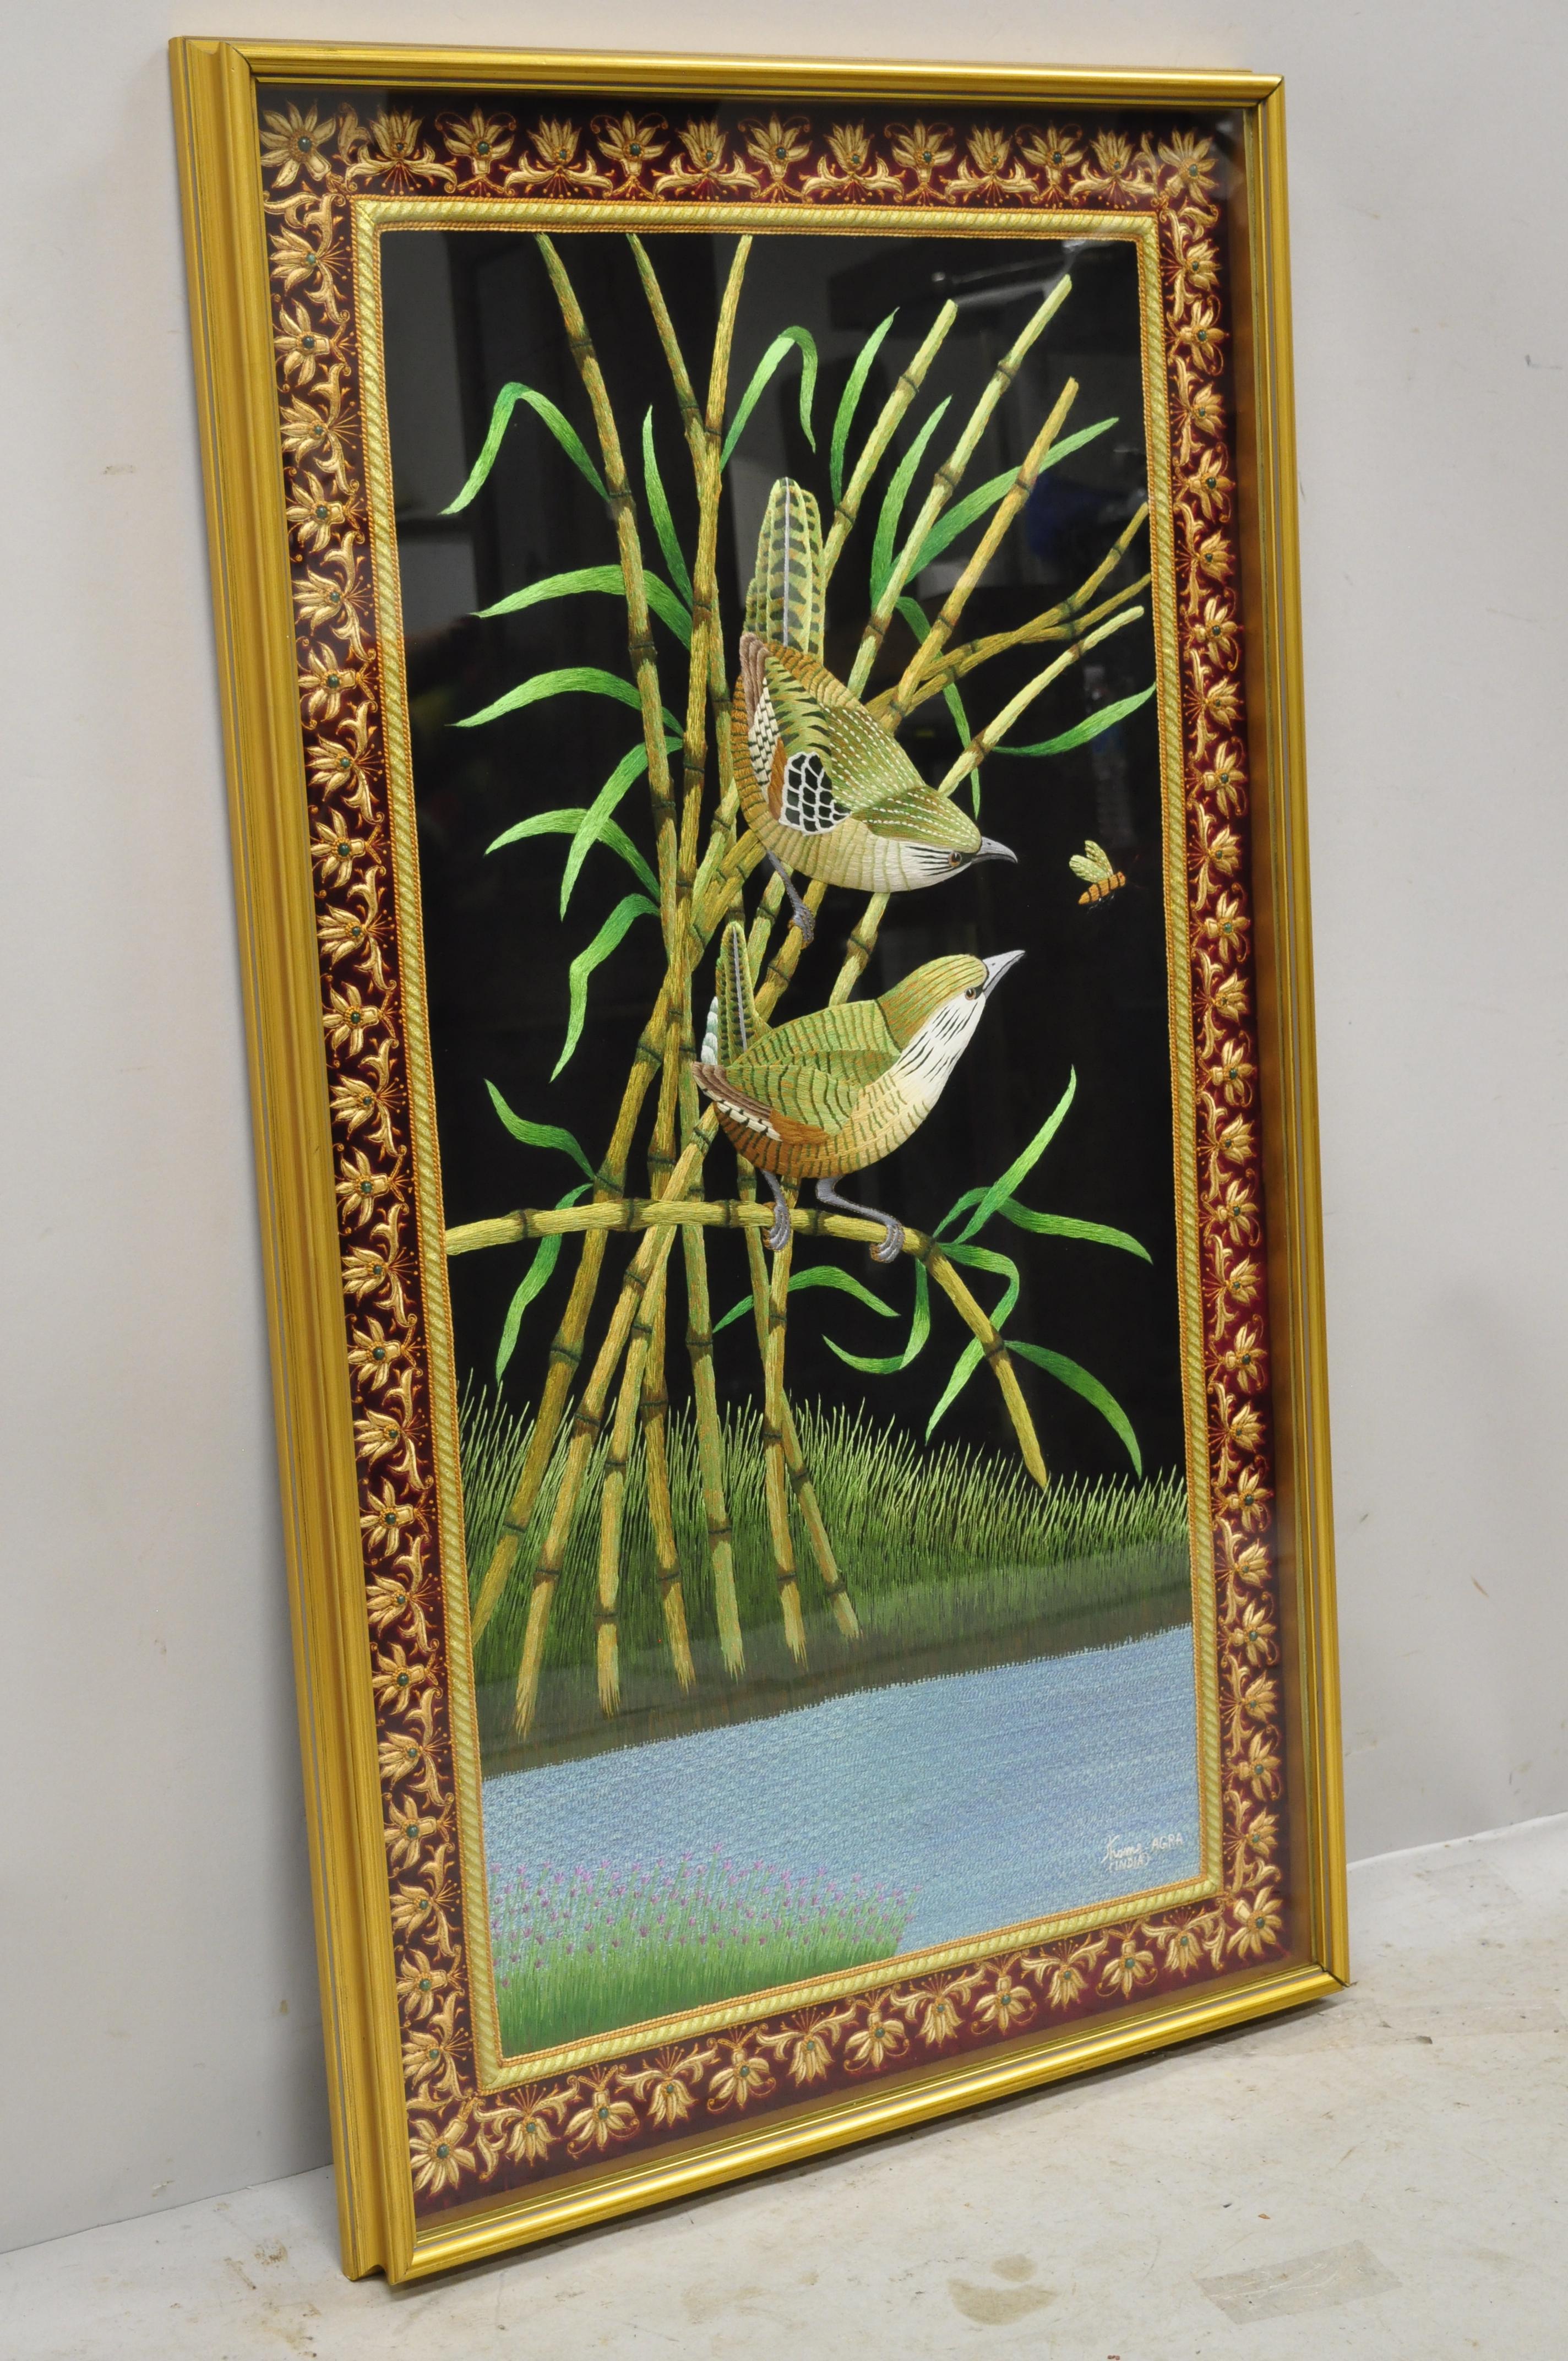 Indian embroidered birds and bees padded tapestry shadowbox frame wall art. Item features glass front shadowbox frame, 3-dimensional raised padded embroidered birds and scenery, stunning colors, nice bead work, original signature, very nice item,